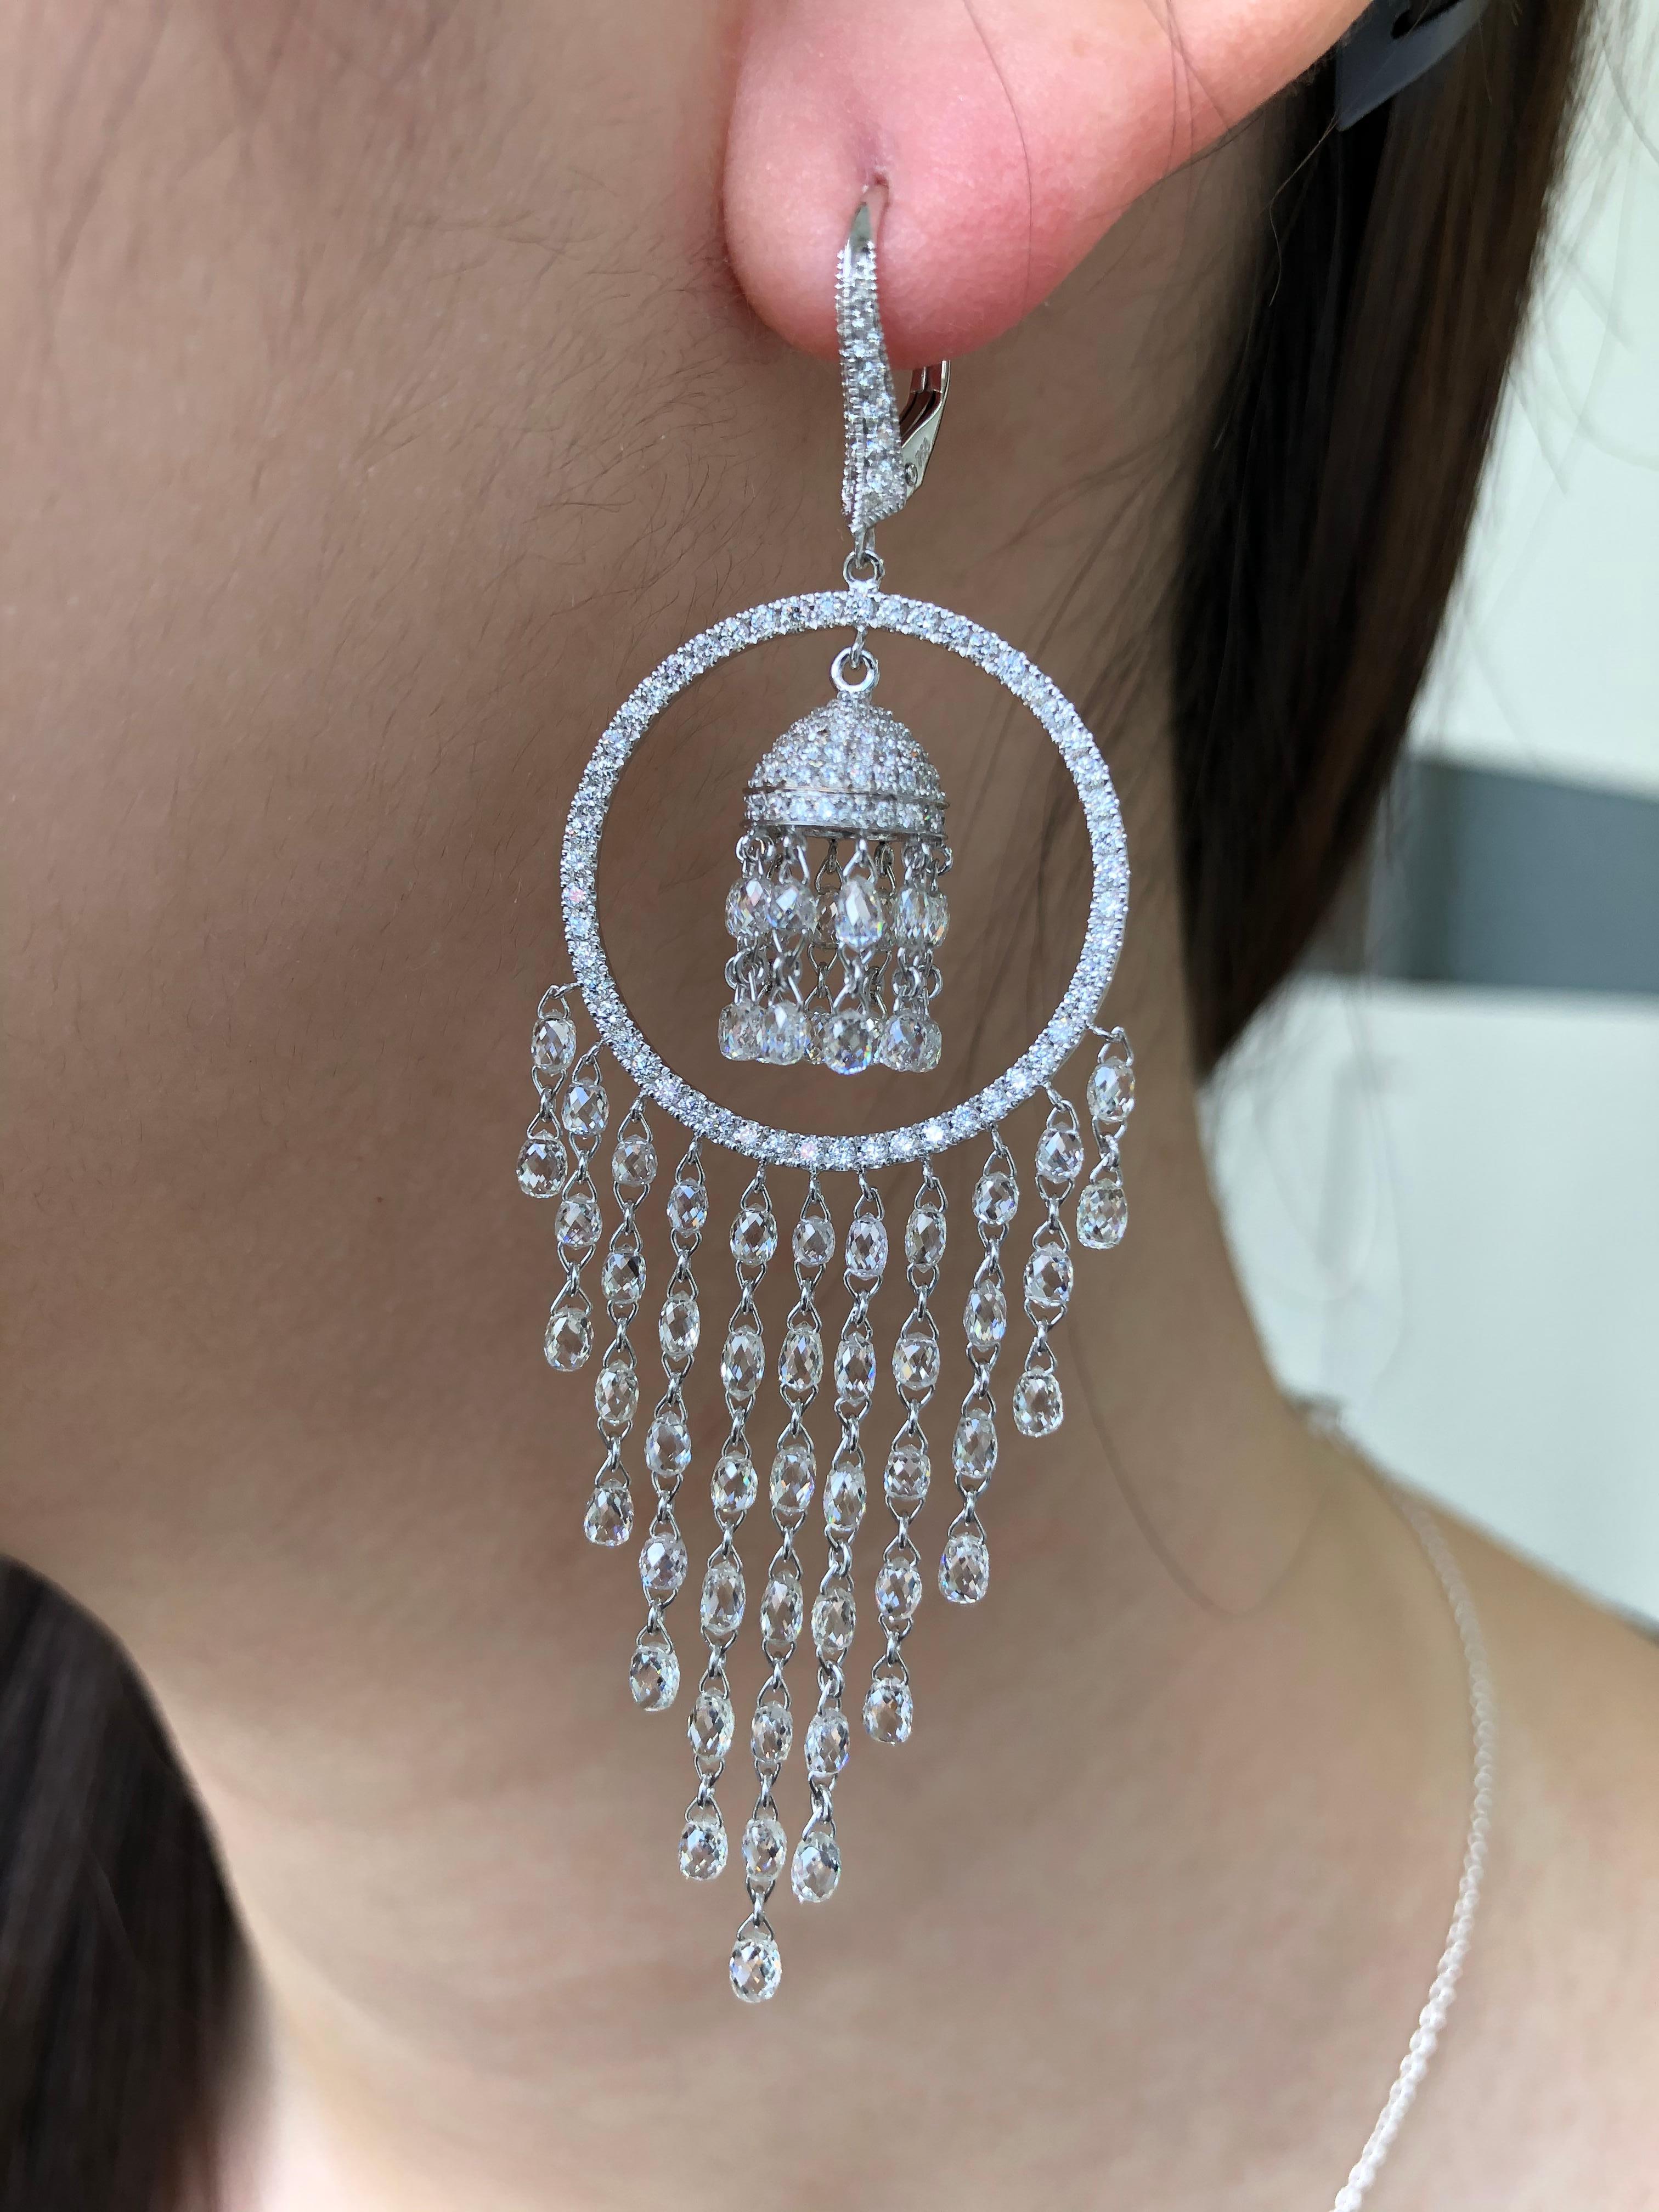 JR 15.39 carats Diamond Briolette Chandelier Earring

Timeless piece of diamonds set in some of the most lustrous chandelier settings is what we promise and is exactly what you get with this set of earring.

Diamond Weight : 15.39 carats

Addition